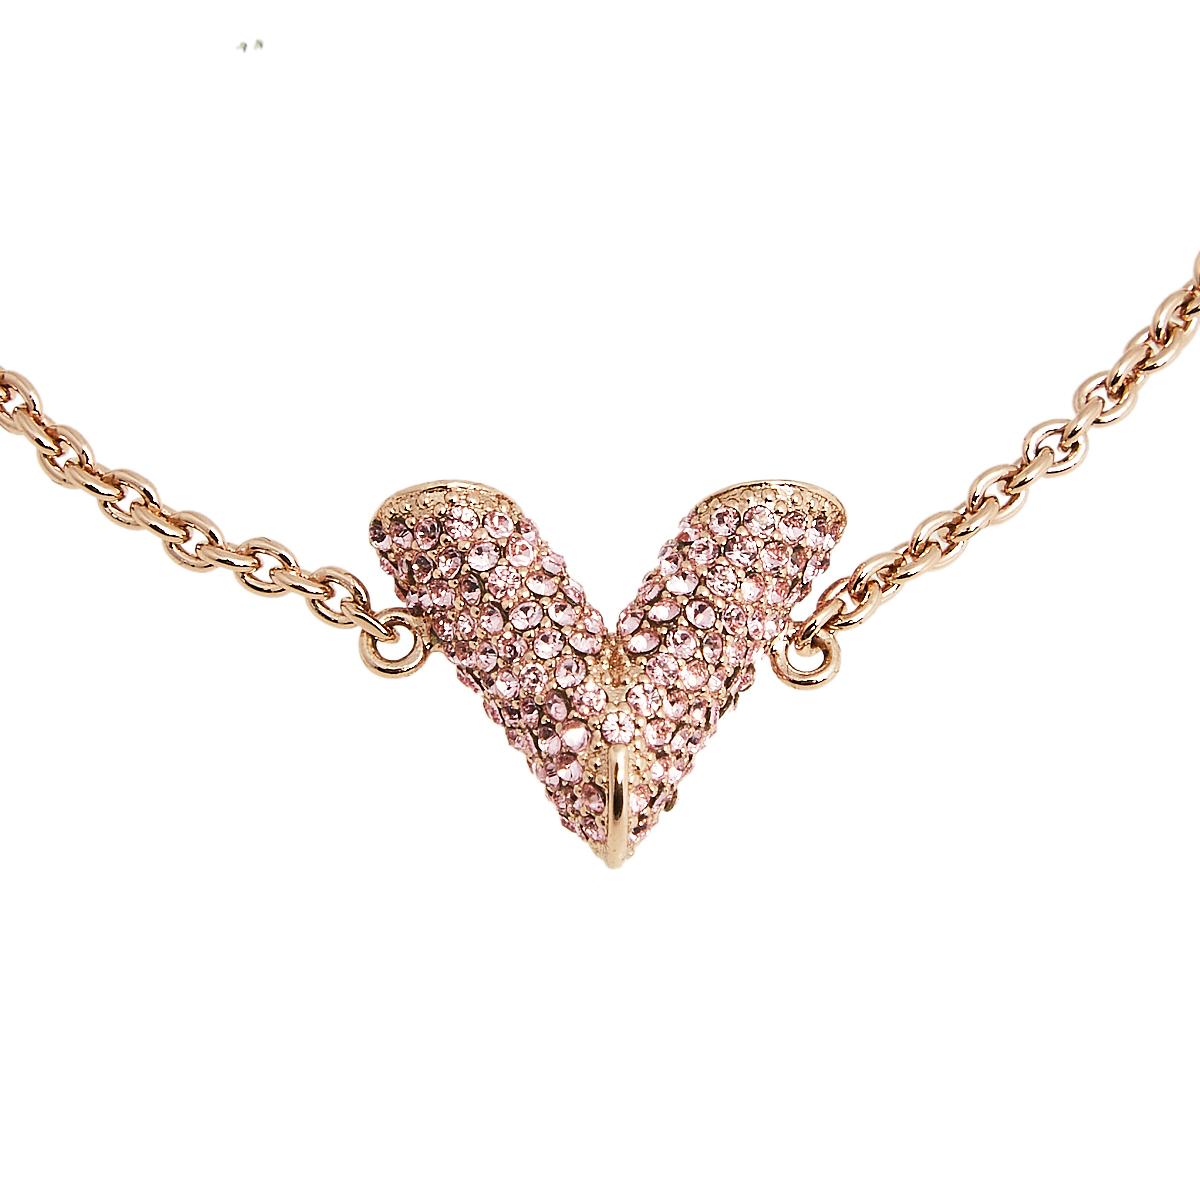 Create an elegant, timeless, and classic addition to both casual and even special events with this beautiful Louis Vuitton Essential V bracelet. Constructed in rose gold-tone metal, this bracelet features a large V charm decked with pink crystals